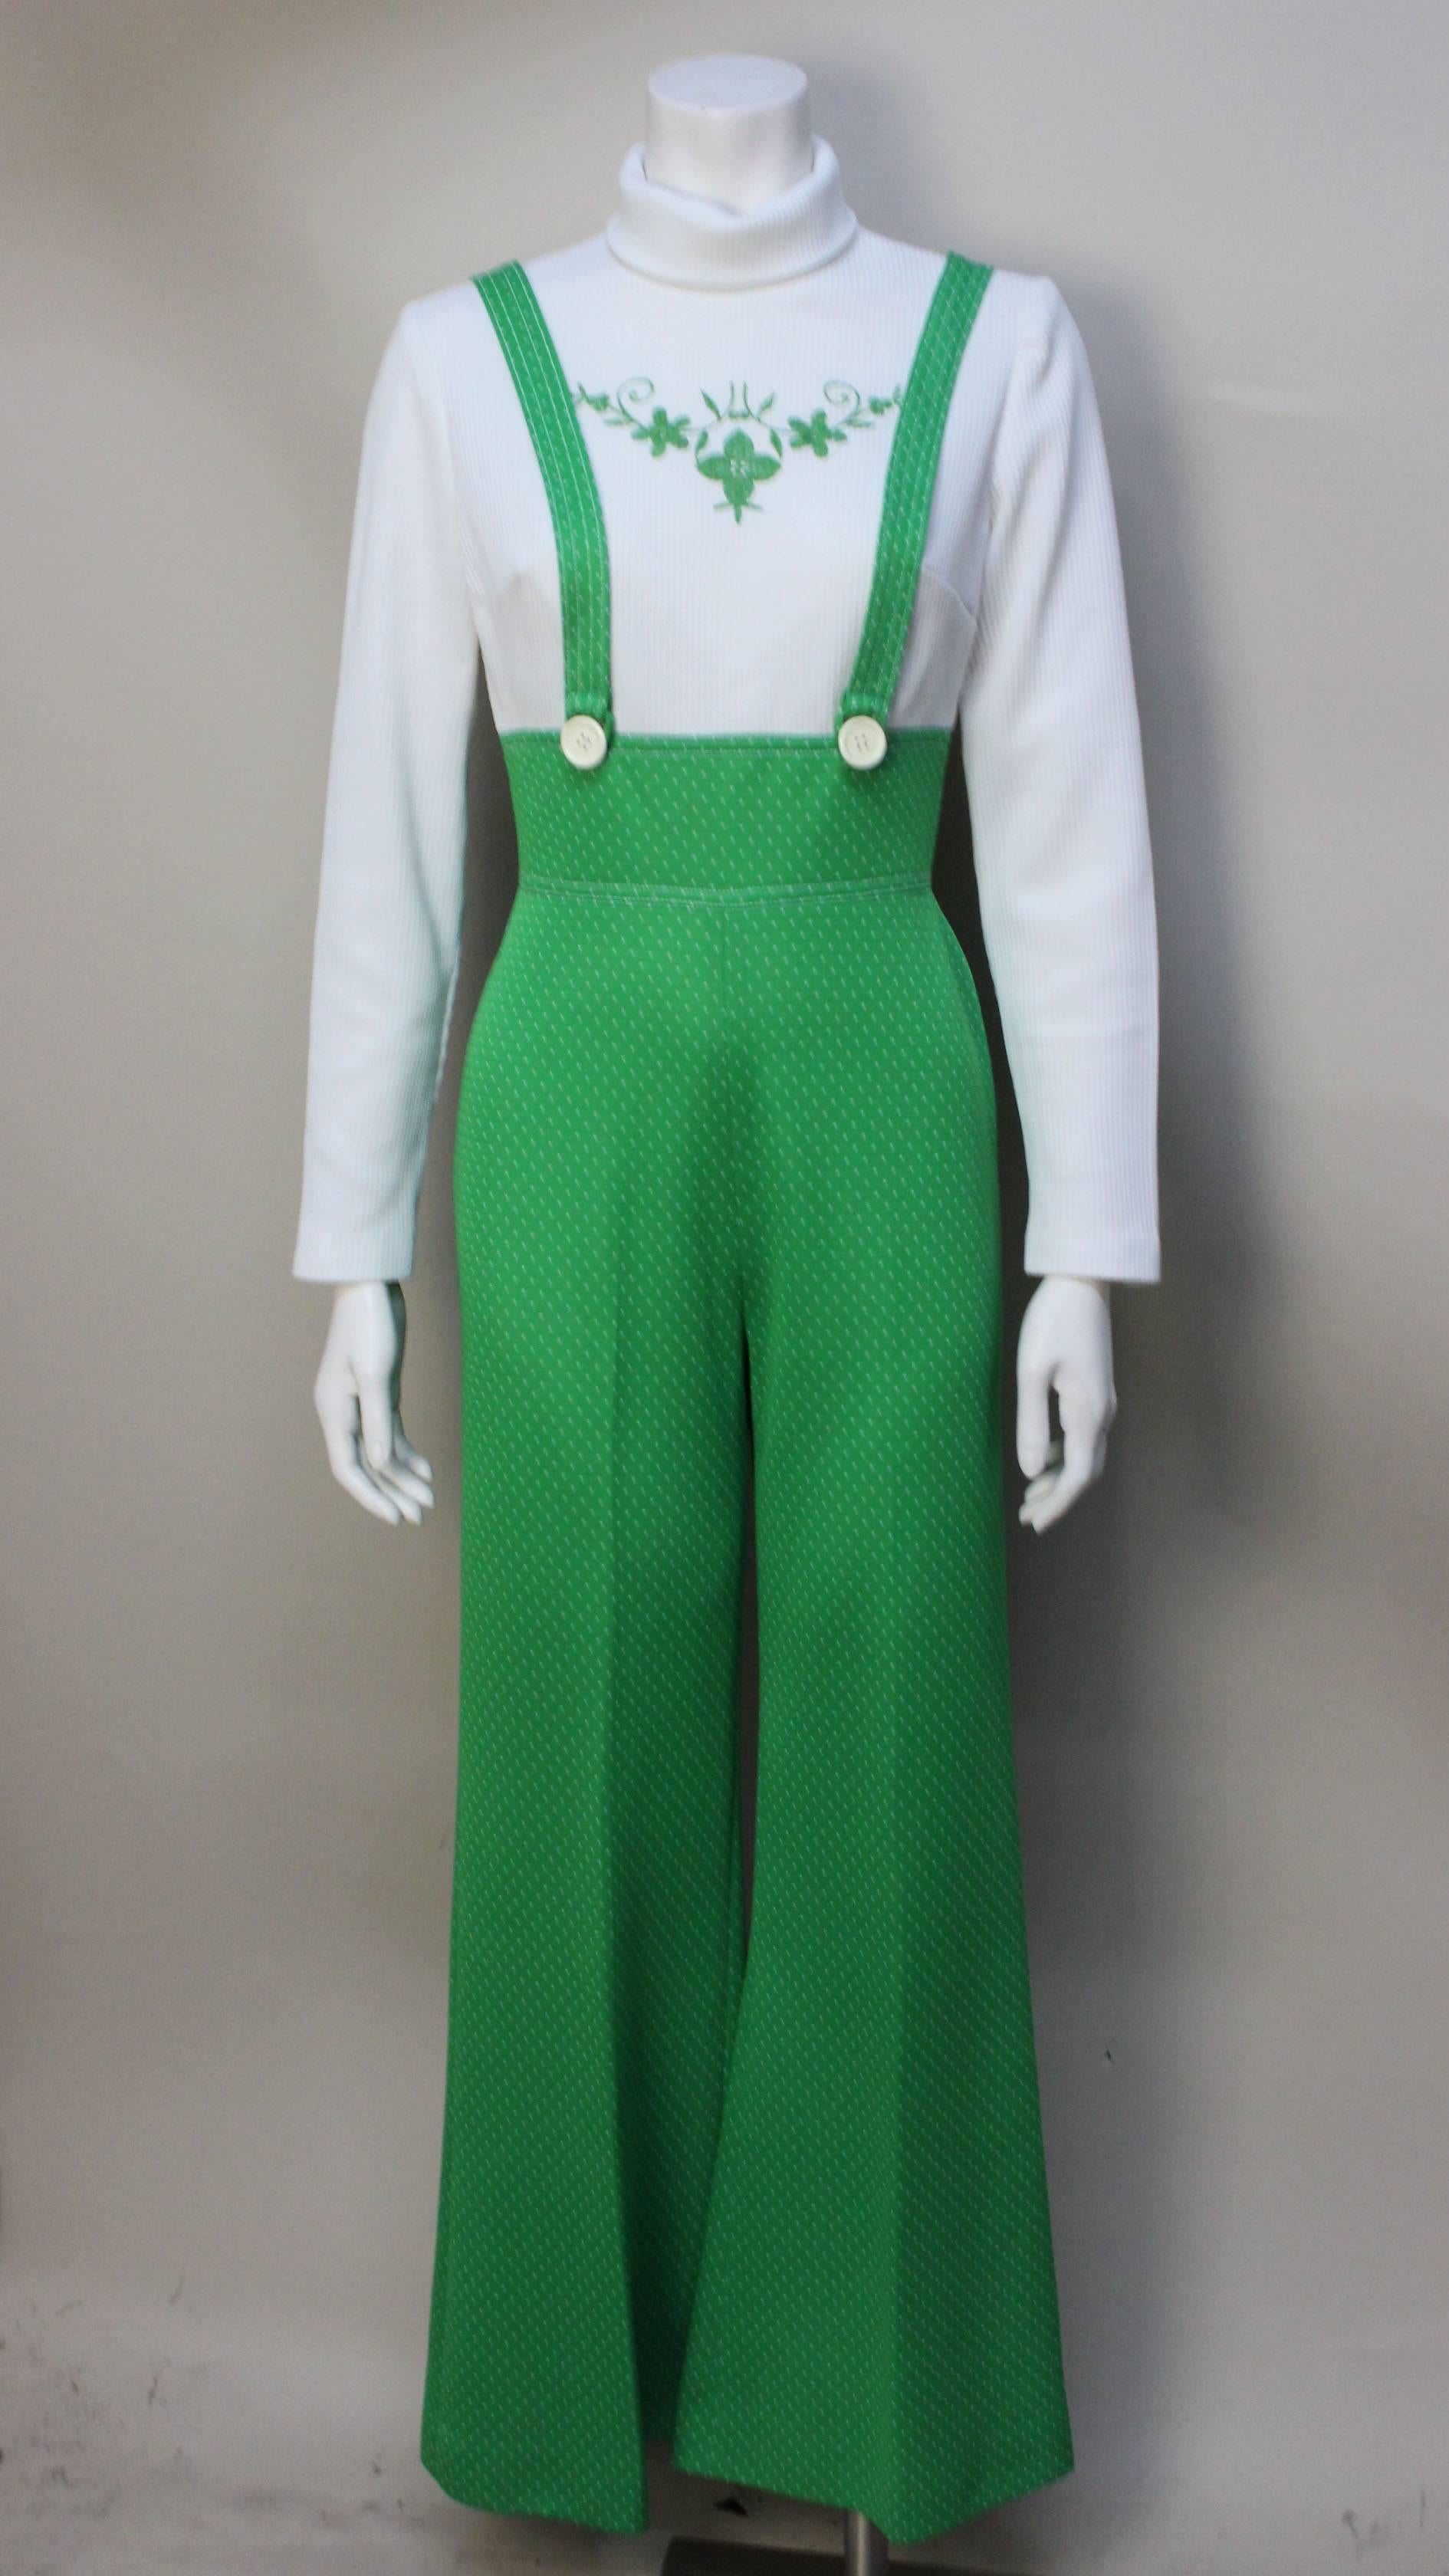 Jerell of Texas was a manufacturer of stylish clothing for juniors in the 60's and 70's. The design of this jumpsuit was based on mod styles coming out of London in the late 1960's. The one piece jumpsuit resembles a two piece overall with a moch